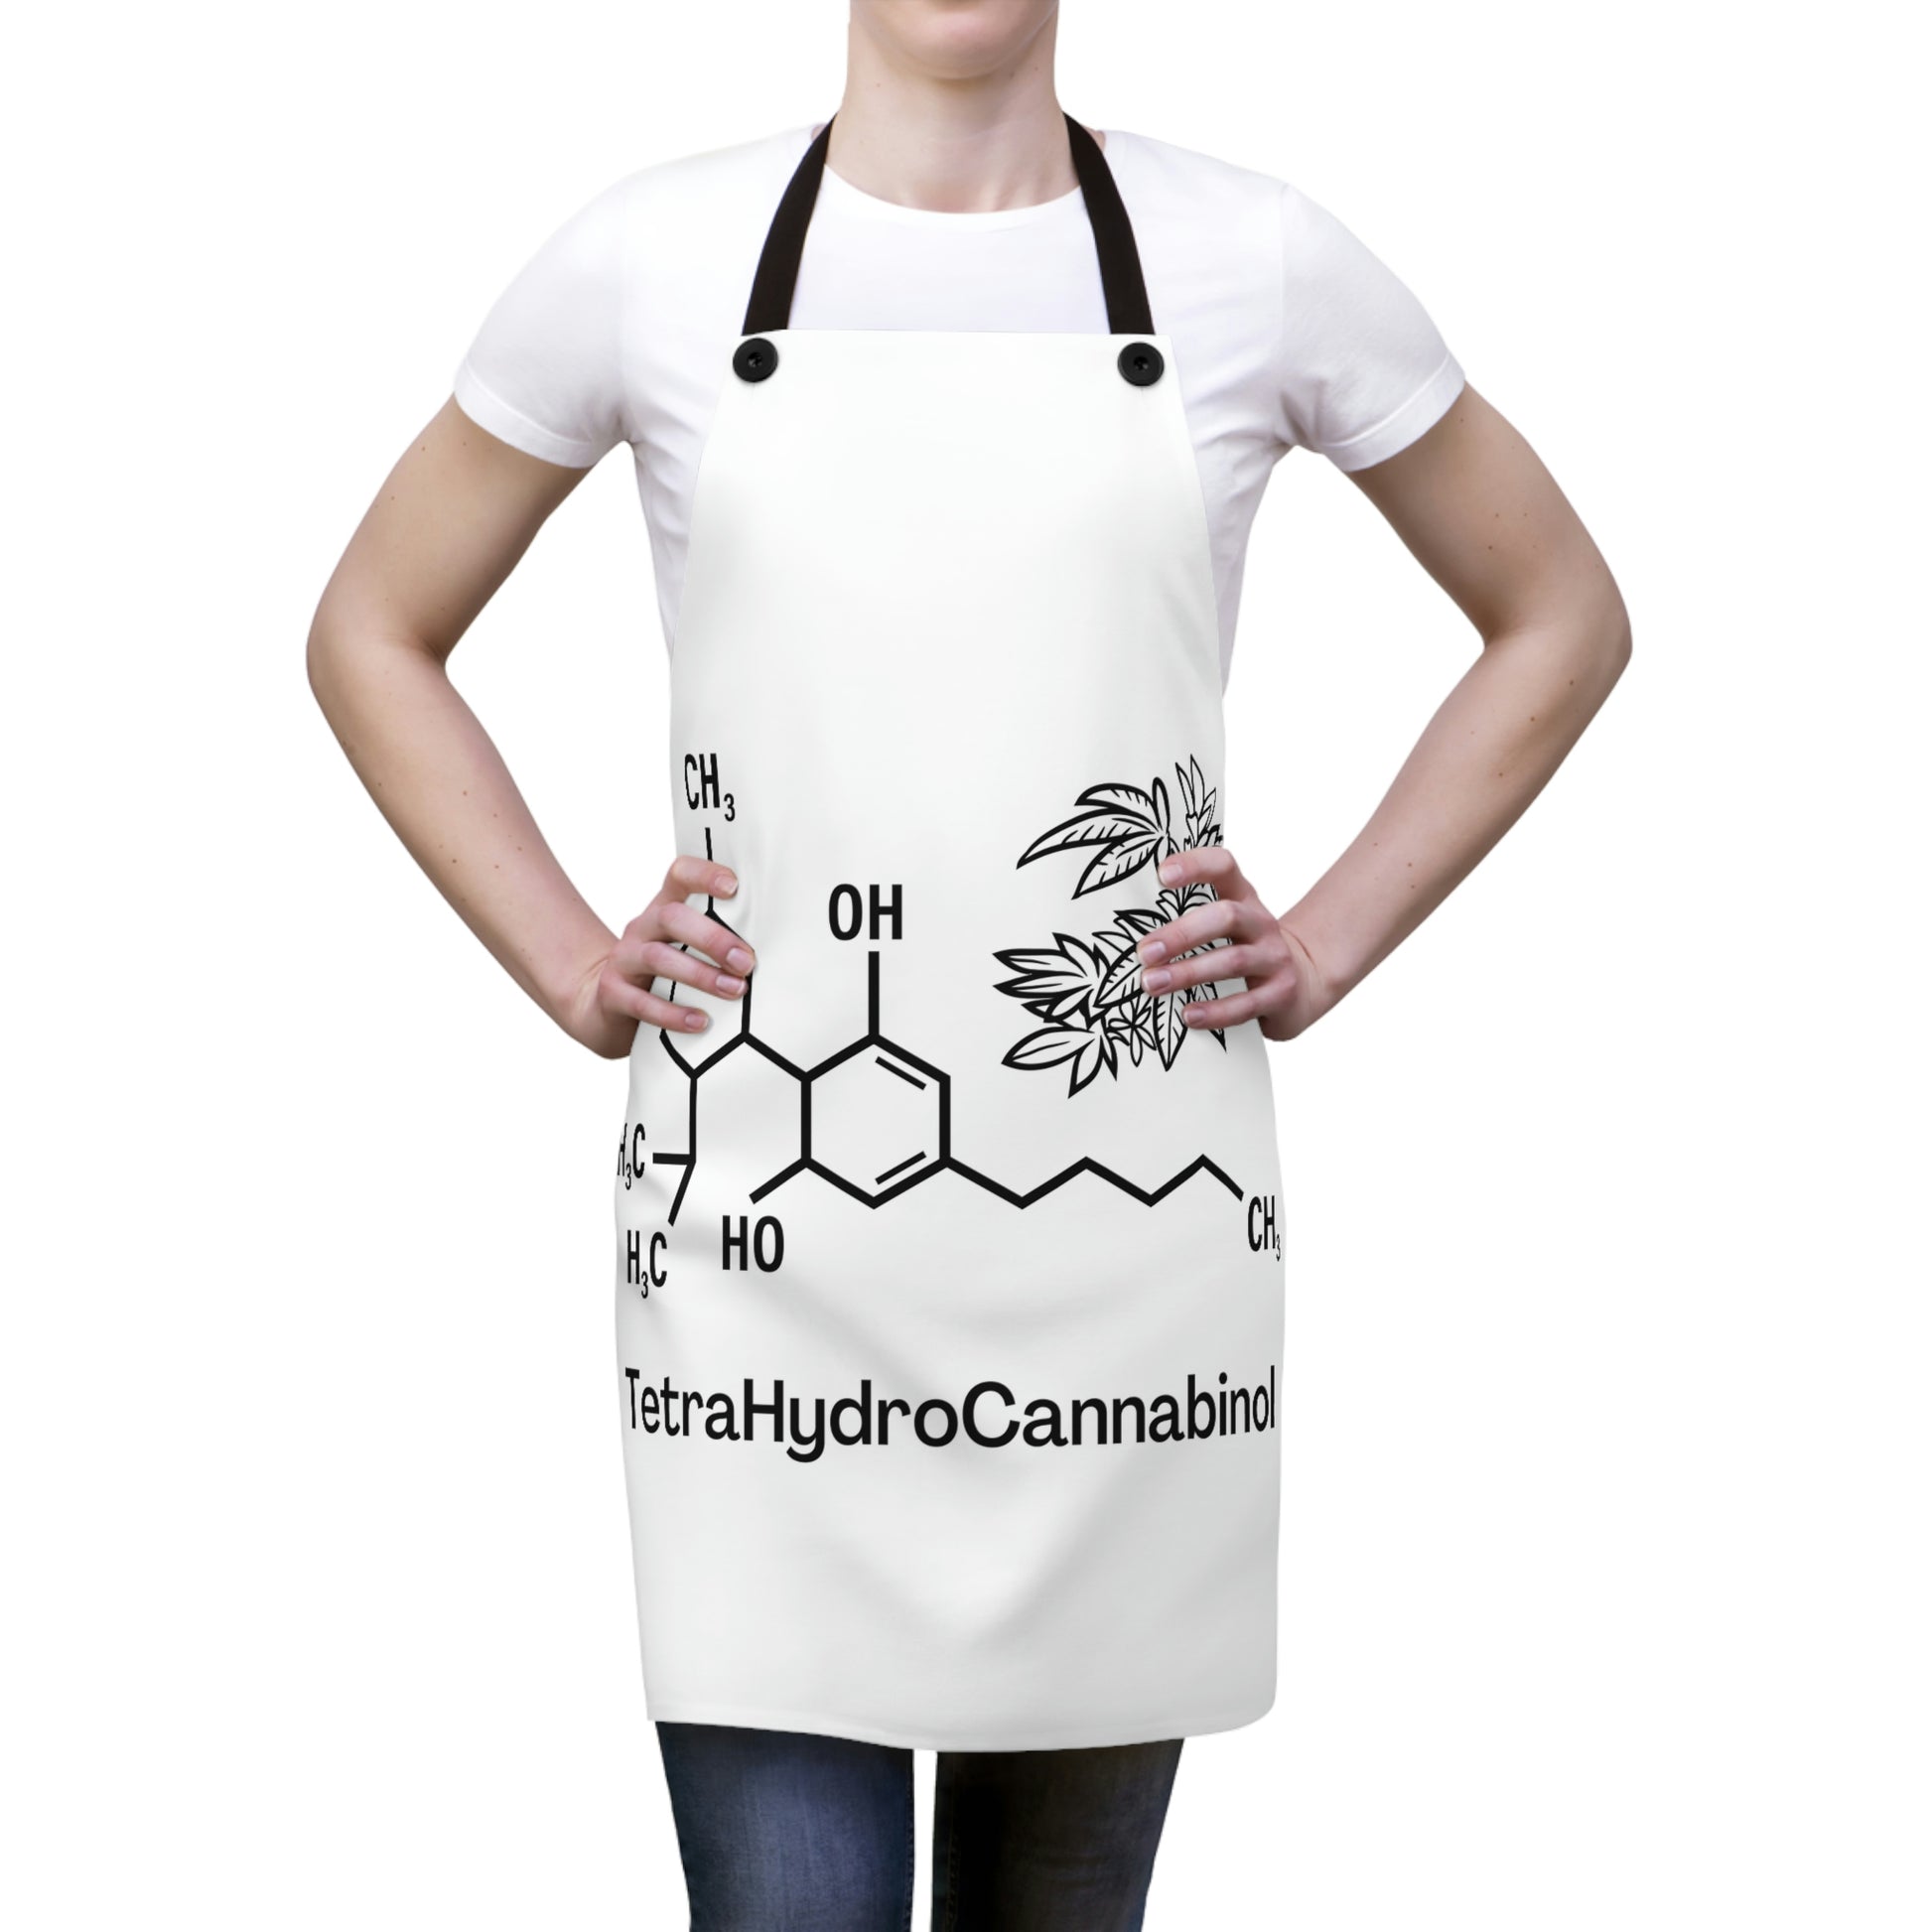 A woman wears the Tetrahydrocannabinol Chef's Apron with weed leaves and picture of chemical compound make up